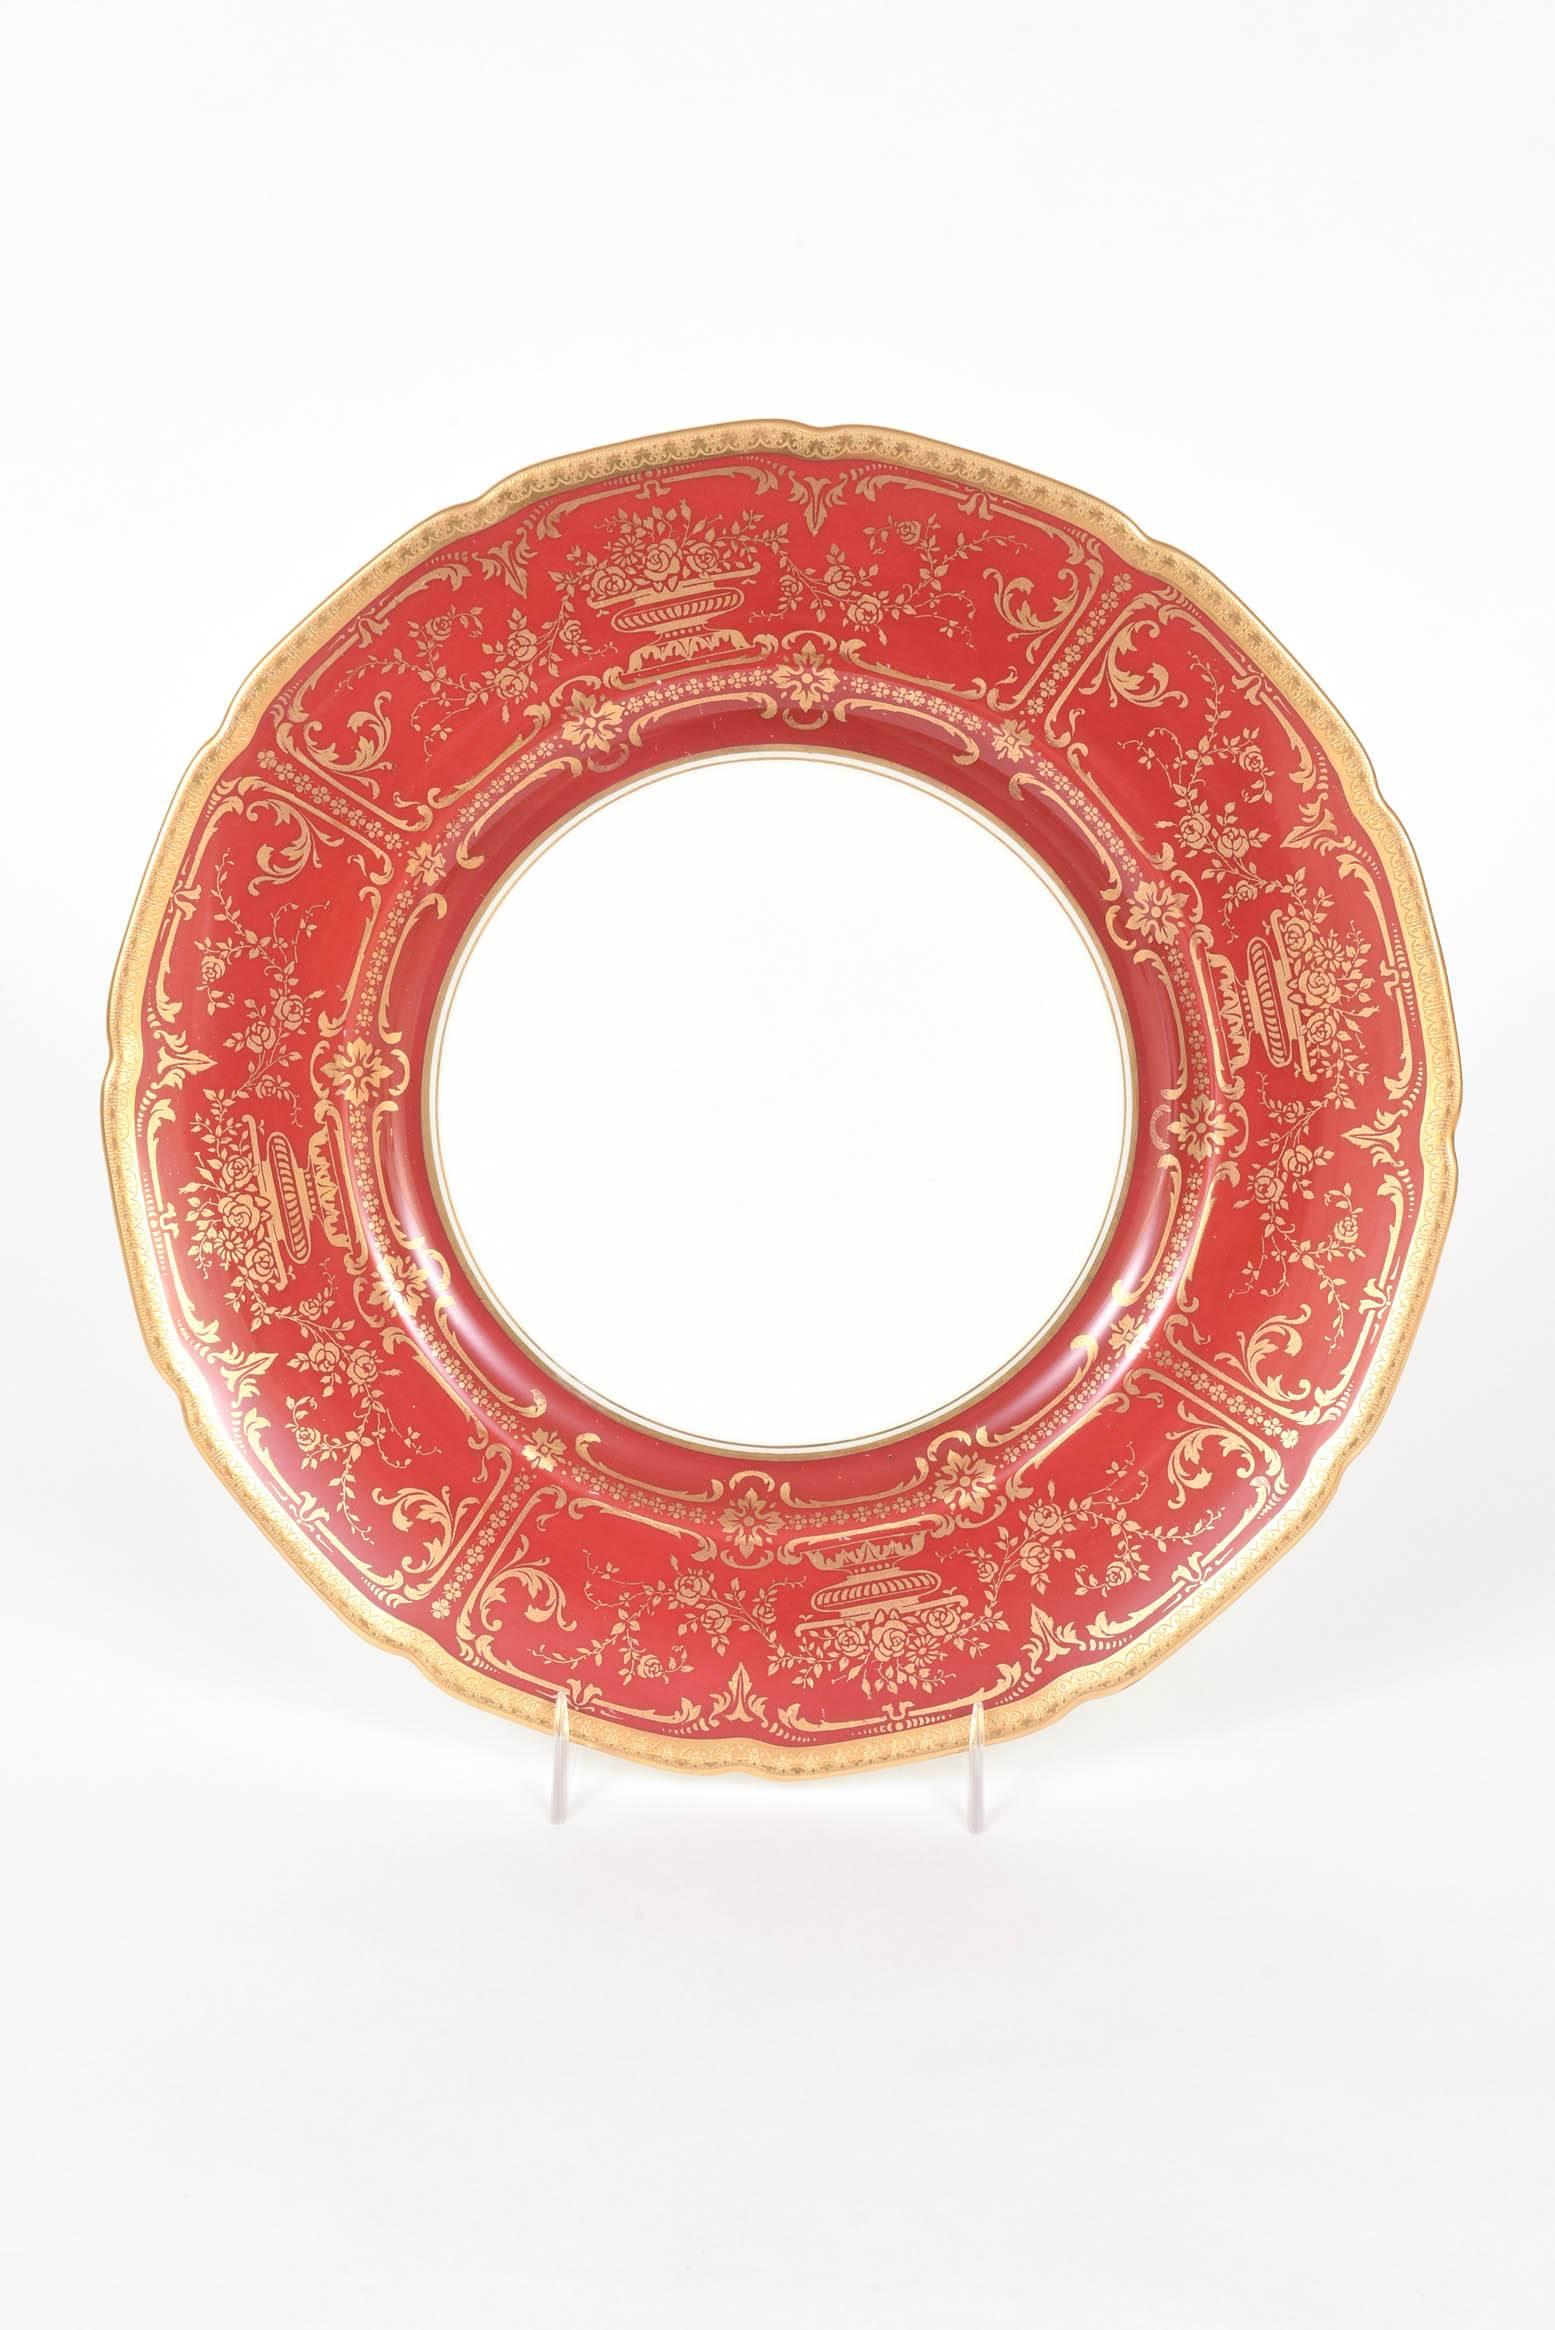 Hand-Crafted 12 Antique Dinner Plates, Red and Gold by Royal Doulton, England